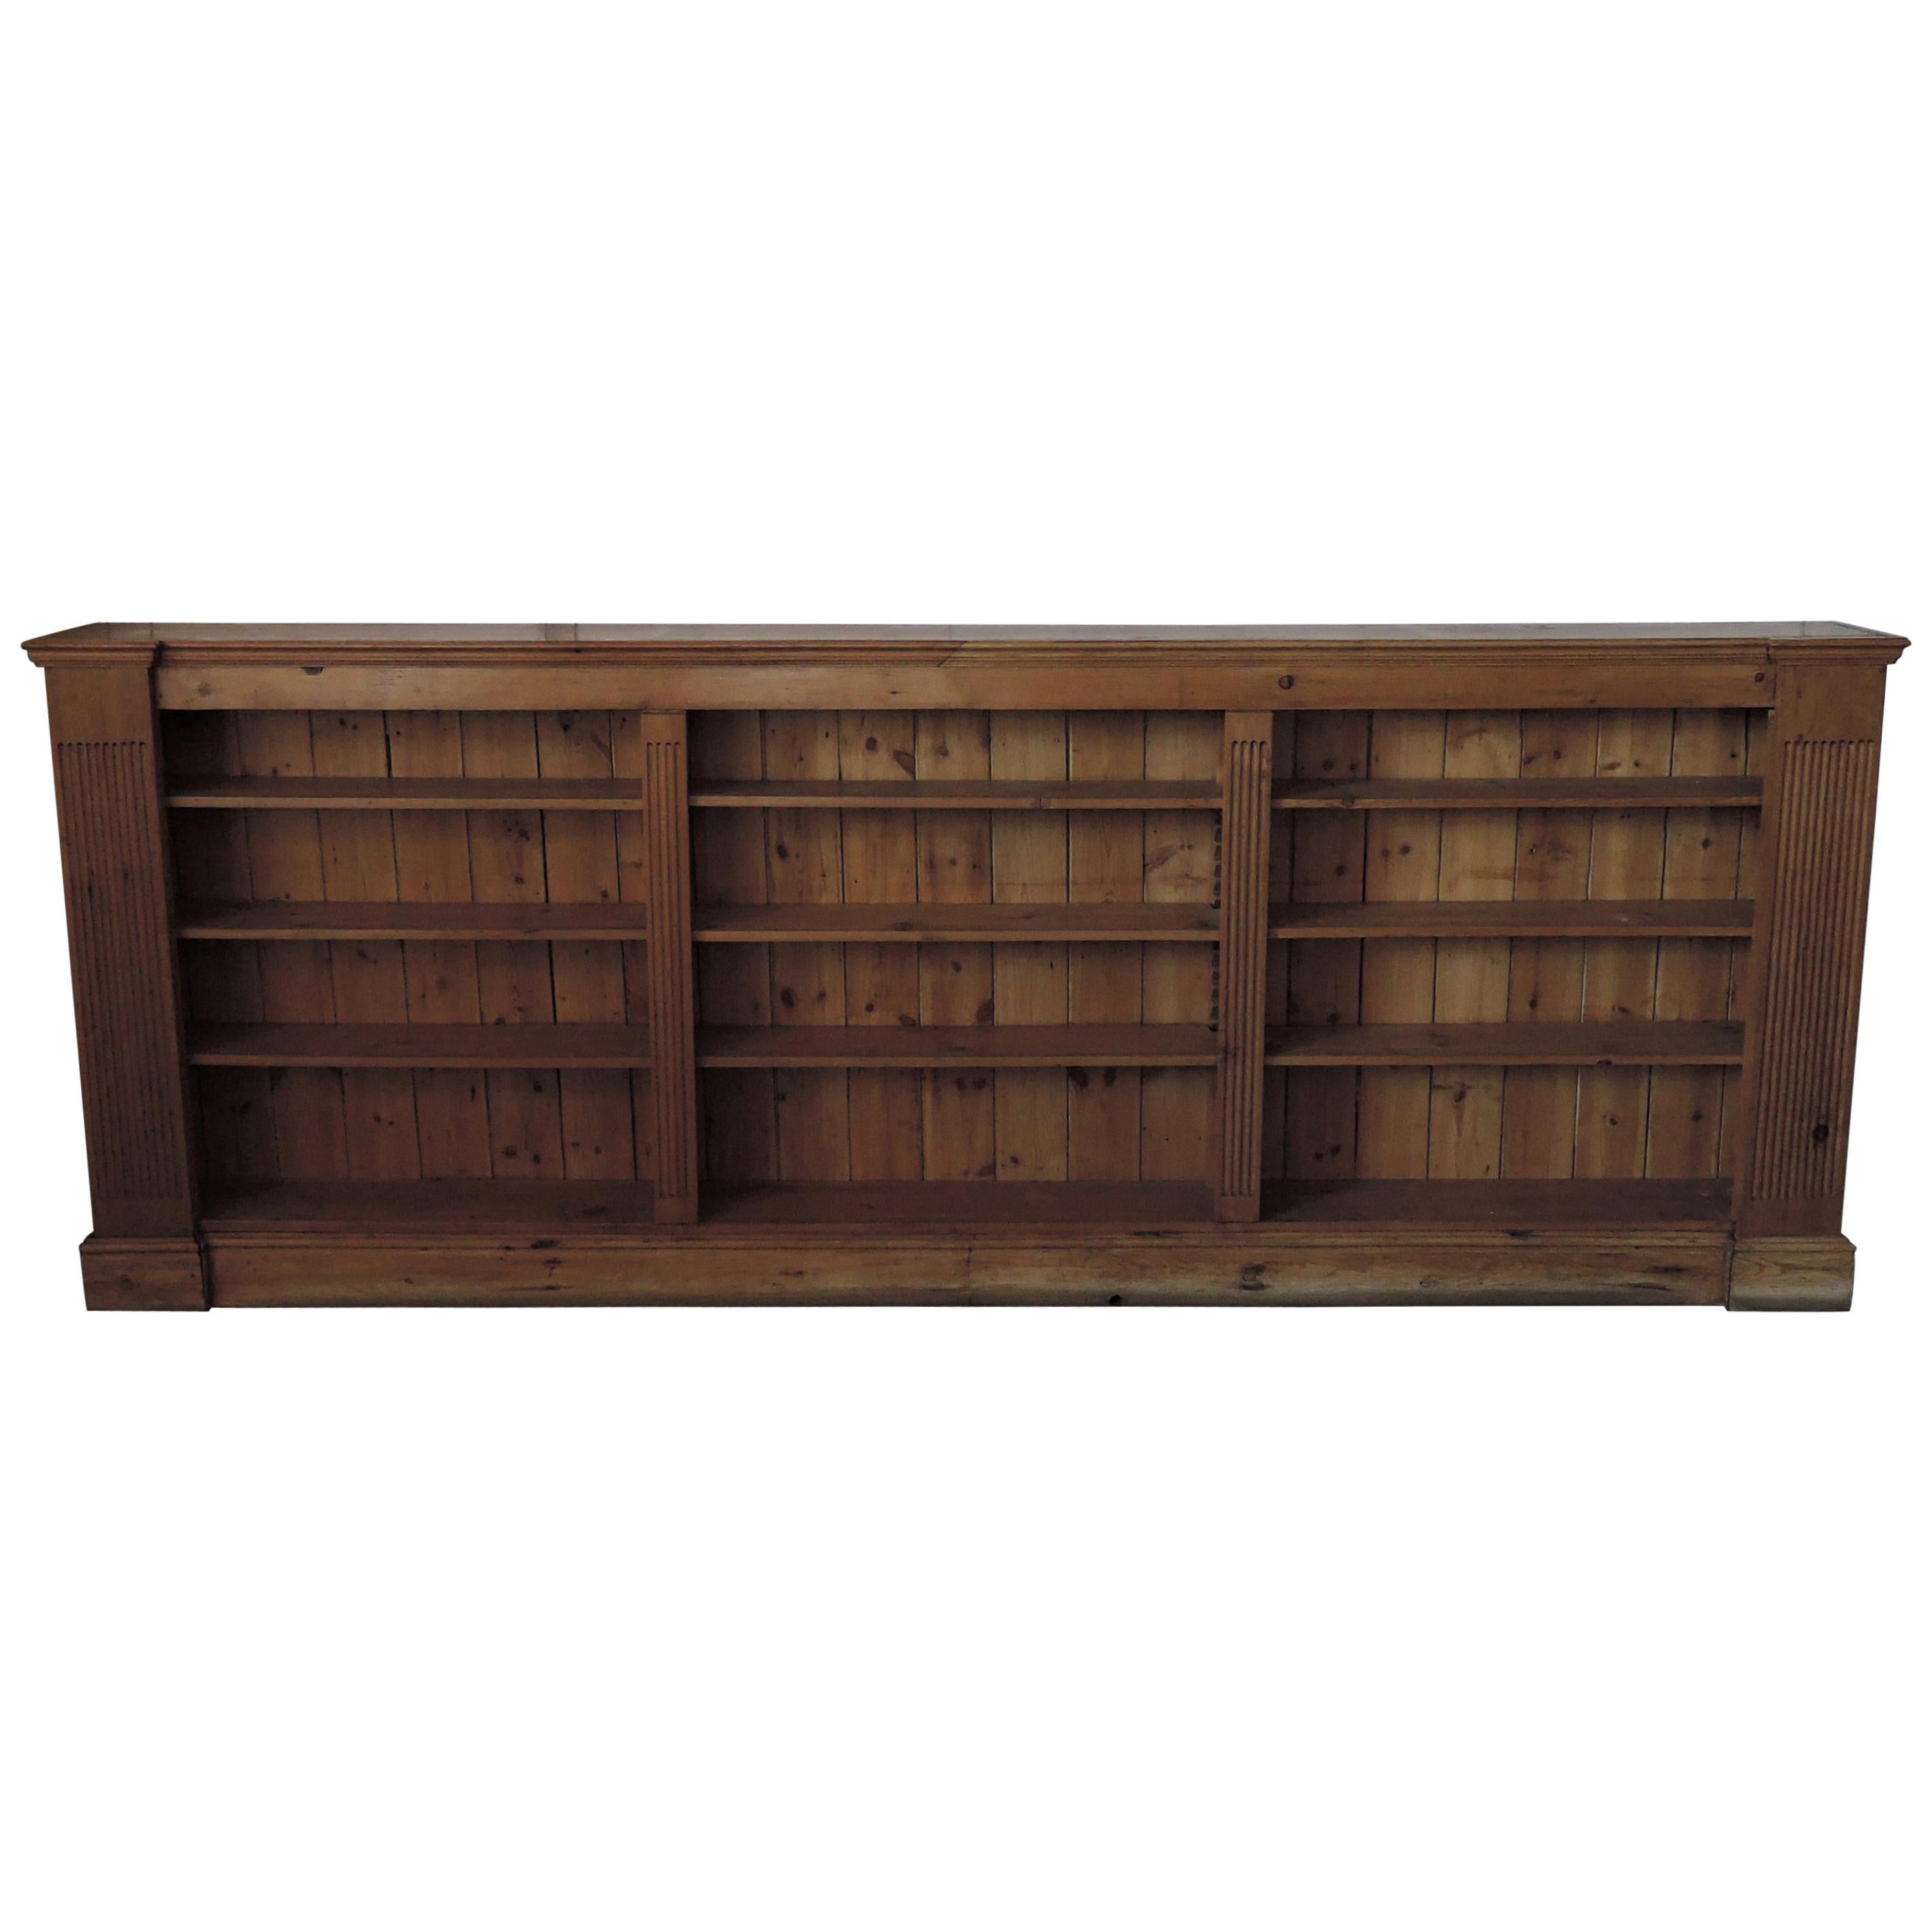 Large French Neoclassical Pine Bookcase For Sale